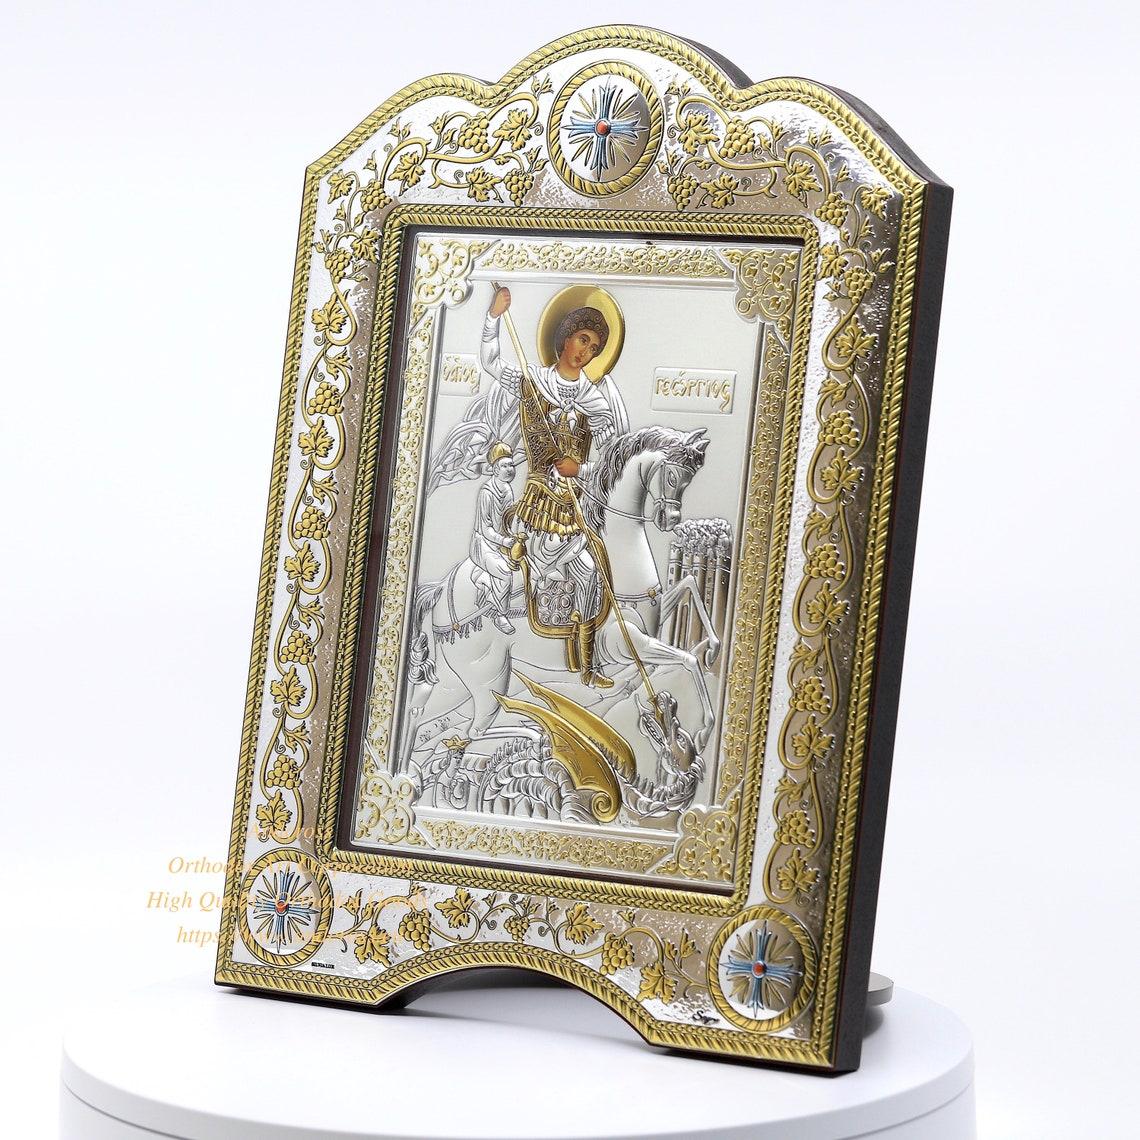 The Great Miraculous Christian Orthodox Silver icon-Of St. George The Victorious. 21cmx28cm Gold and Silver Version/Frame with glass. B112|The Great Miraculous Christian Orthodox Silver icon-Of St. George The Victorious. 21cmx28cm Gold and Silver Version/Frame with glass. B112|The Great Miraculous Christian Orthodox Silver icon-Of St. George The Victorious. 21cmx28cm Gold and Silver Version/Frame with glass. B112|The Great Miraculous Christian Orthodox Silver icon-Of St. George The Victorious. 21cmx28cm Gold and Silver Version/Frame with glass. B112|The Great Miraculous Christian Orthodox Silver icon-Of St. George The Victorious. 21cmx28cm Gold and Silver Version/Frame with glass. B112|The Great Miraculous Christian Orthodox Silver icon-Of St. George The Victorious. 21cmx28cm Gold and Silver Version/Frame with glass. B112|The Great Miraculous Christian Orthodox Silver icon-Of St. George The Victorious. 21cmx28cm Gold and Silver Version/Frame with glass. B112|The Great Miraculous Christian Orthodox Silver icon-Of St. George The Victorious. 21cmx28cm Gold and Silver Version/Frame with glass. B112